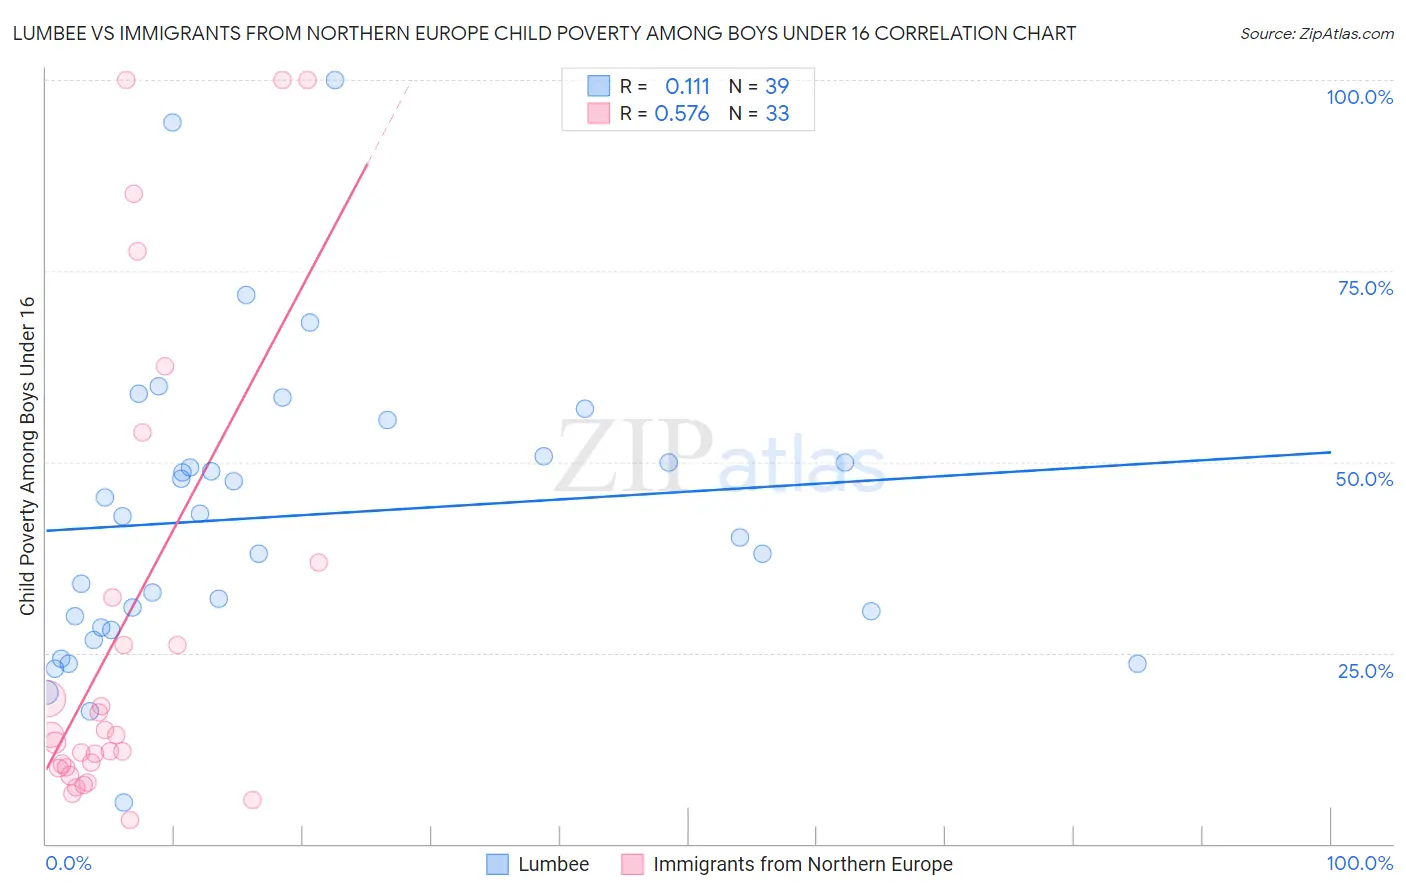 Lumbee vs Immigrants from Northern Europe Child Poverty Among Boys Under 16